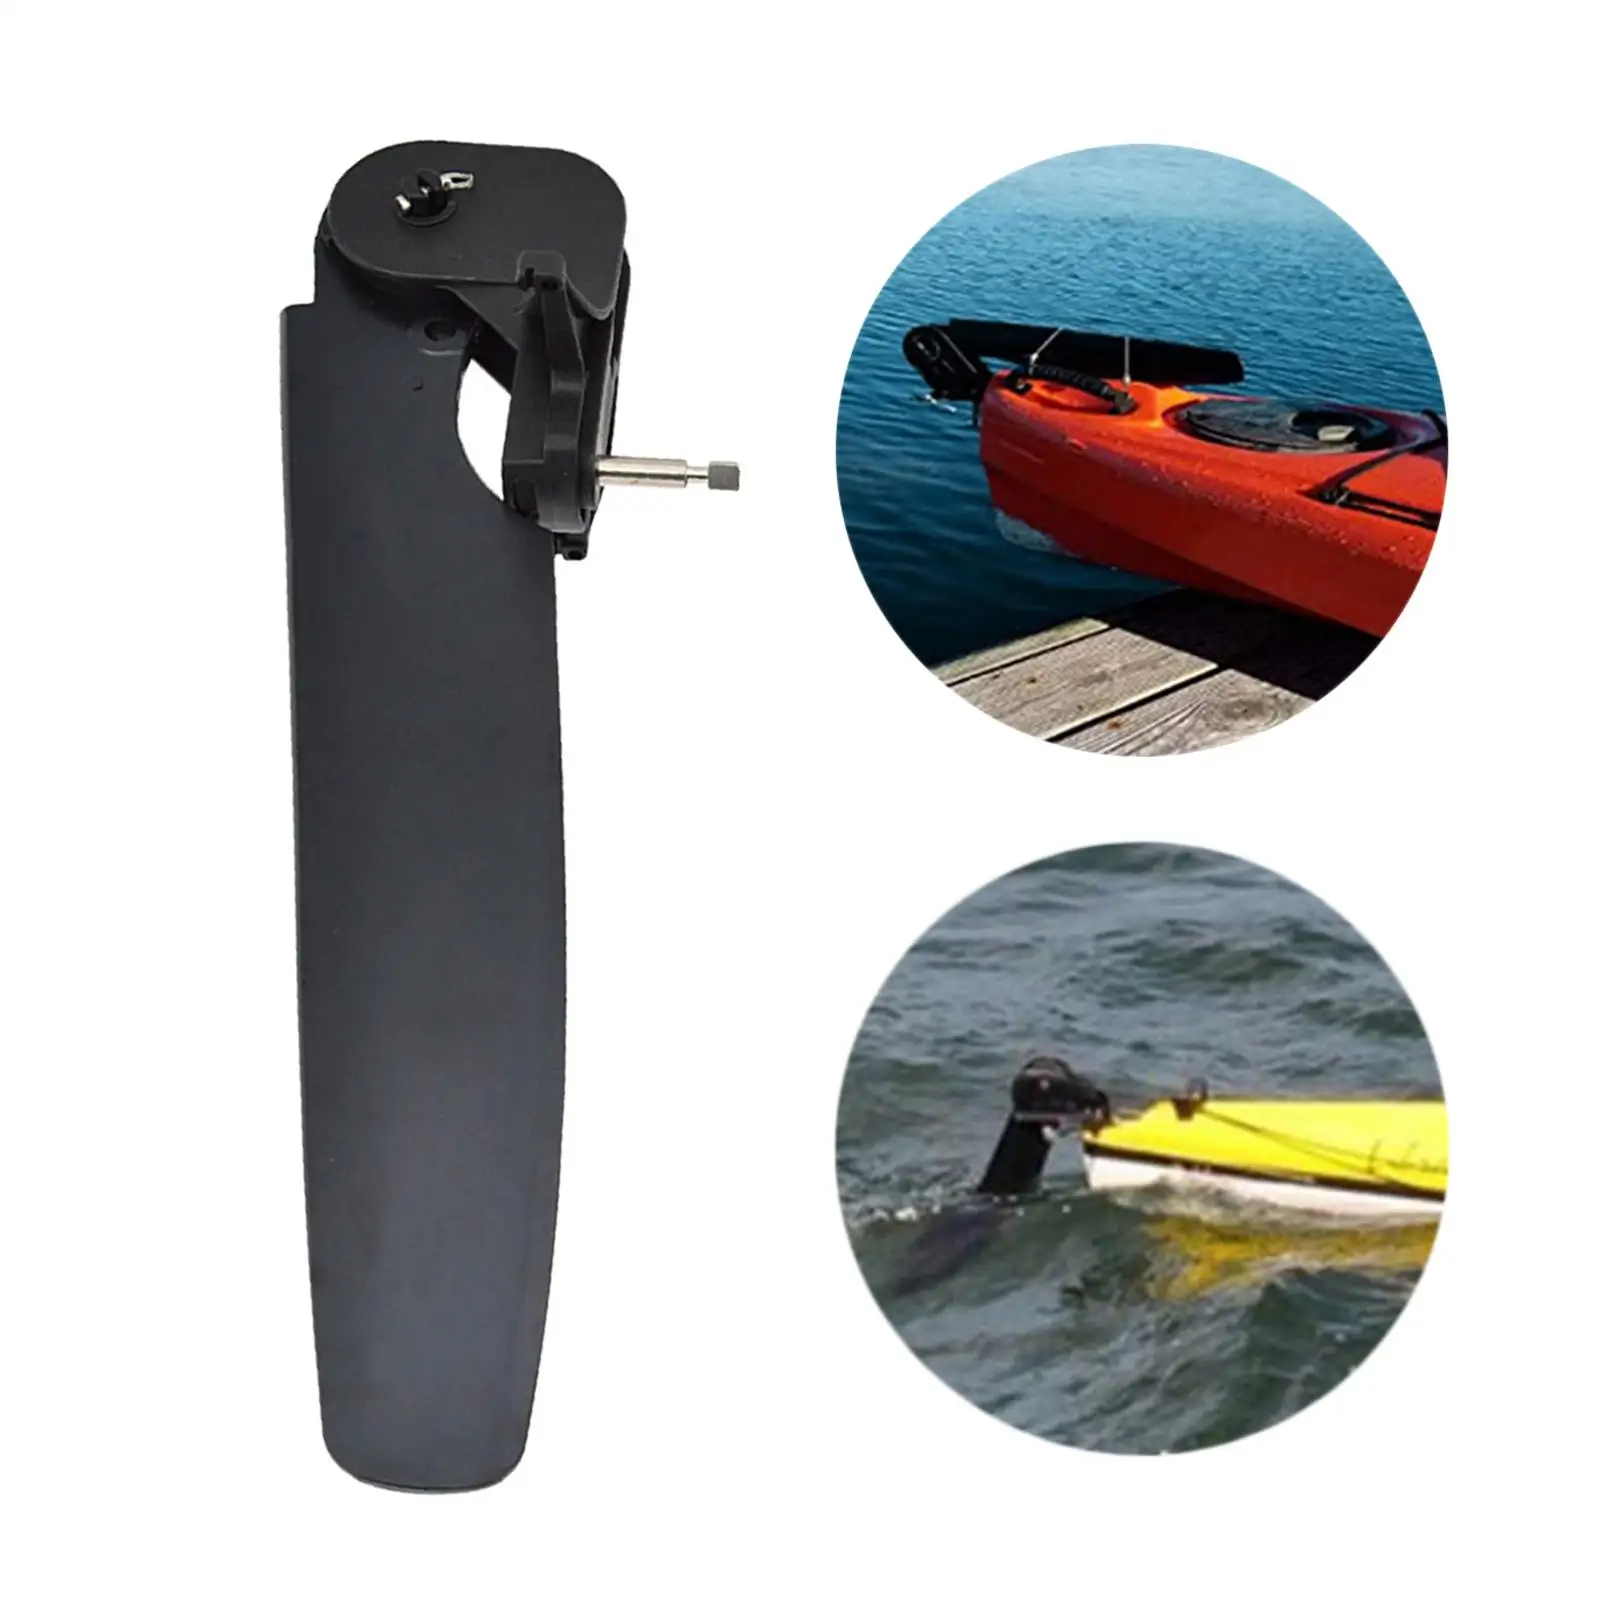 Kayak Boat Rudder Adjustable Direction Fishing Rear Tail Steering System Foot Control Steering System Kayak Accessories